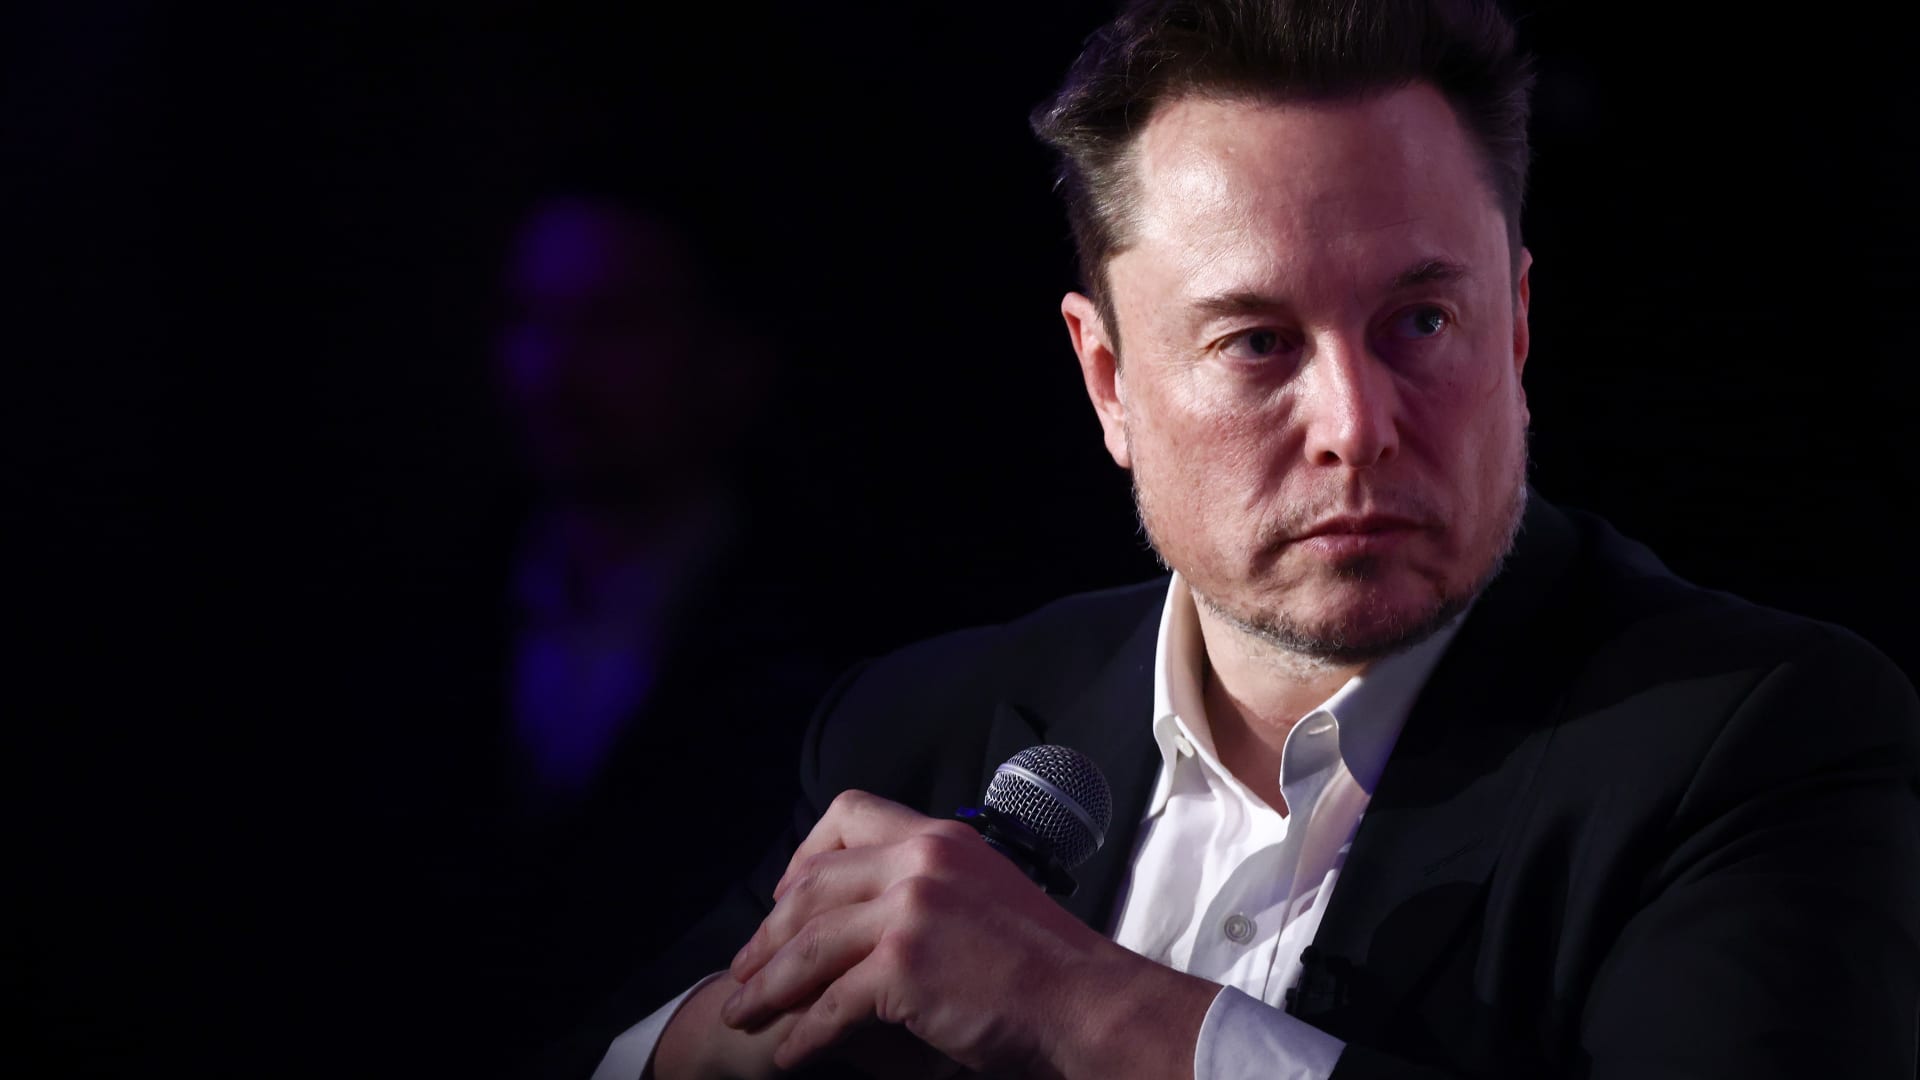 Musk’s OpenAI lawsuit is ‘good advertisement for the benefit of Elon Musk’ but may have little legal merit